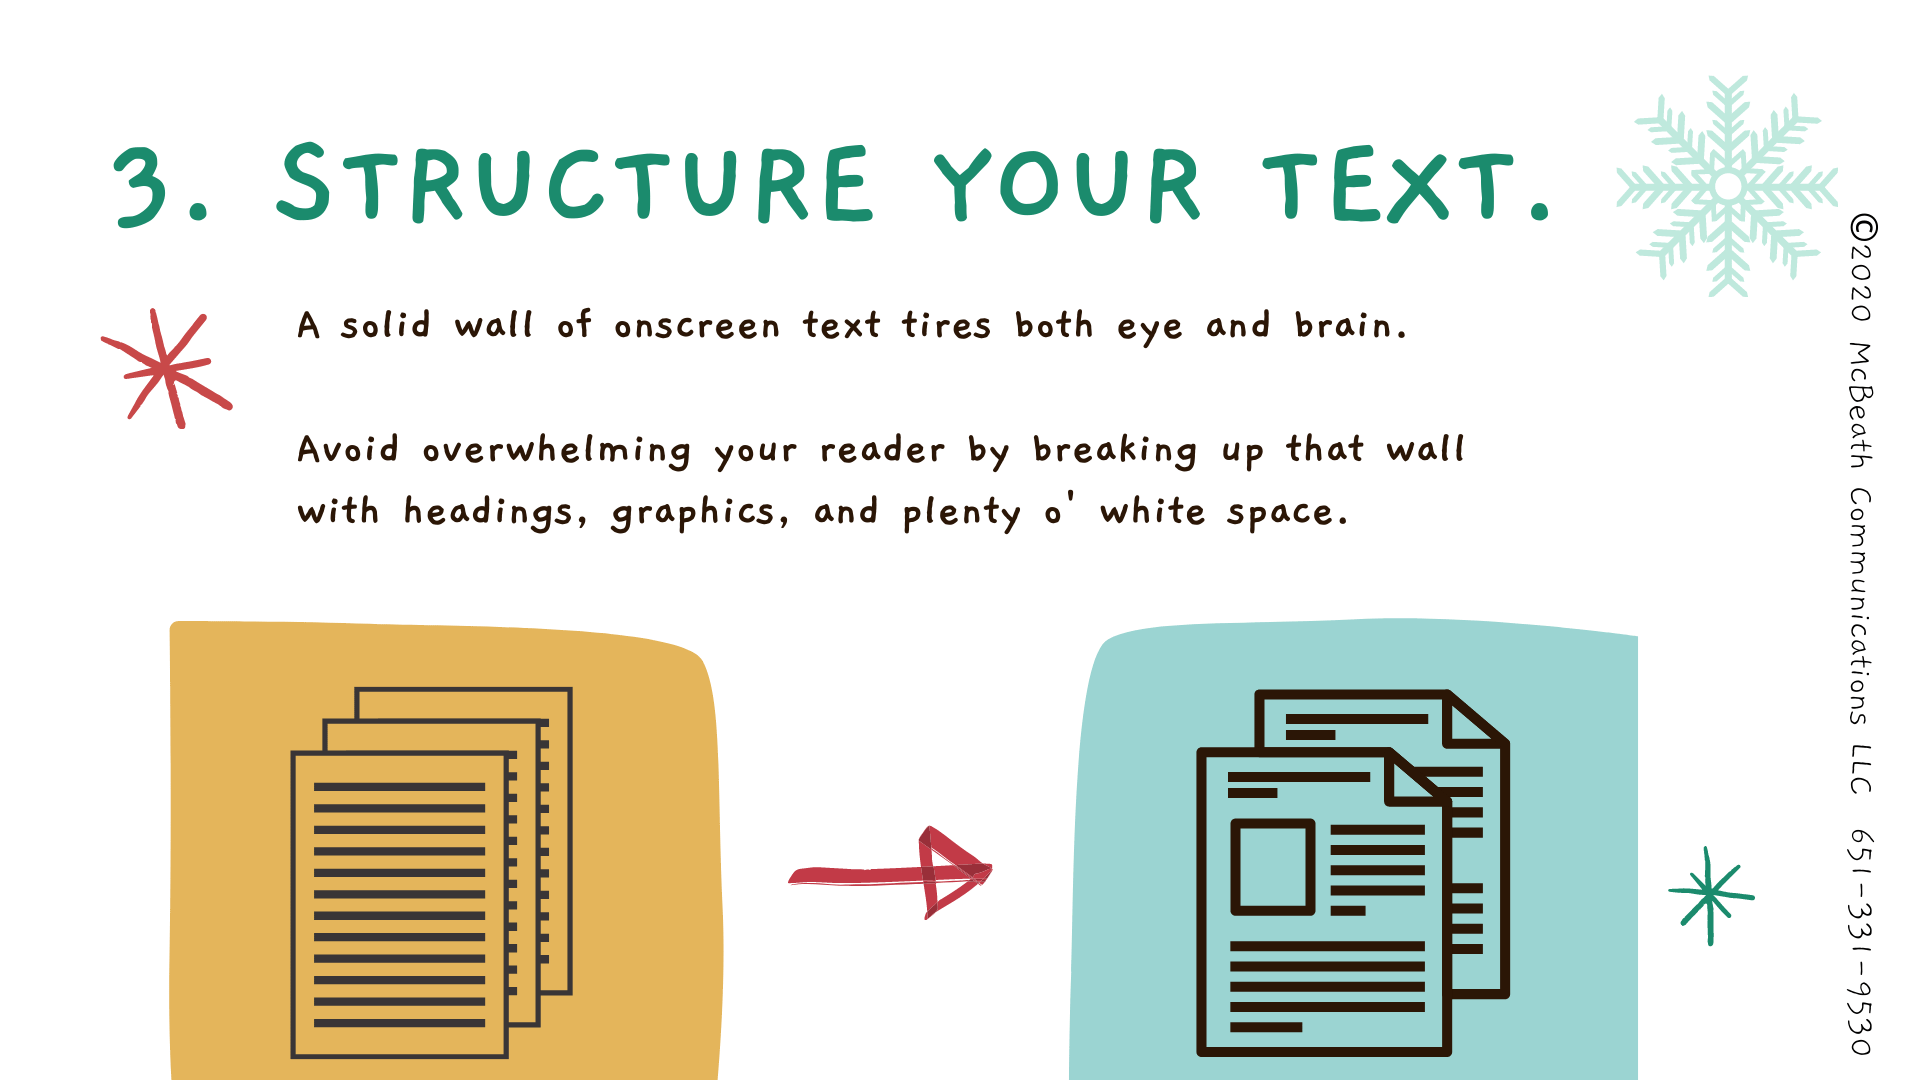 Structure your text